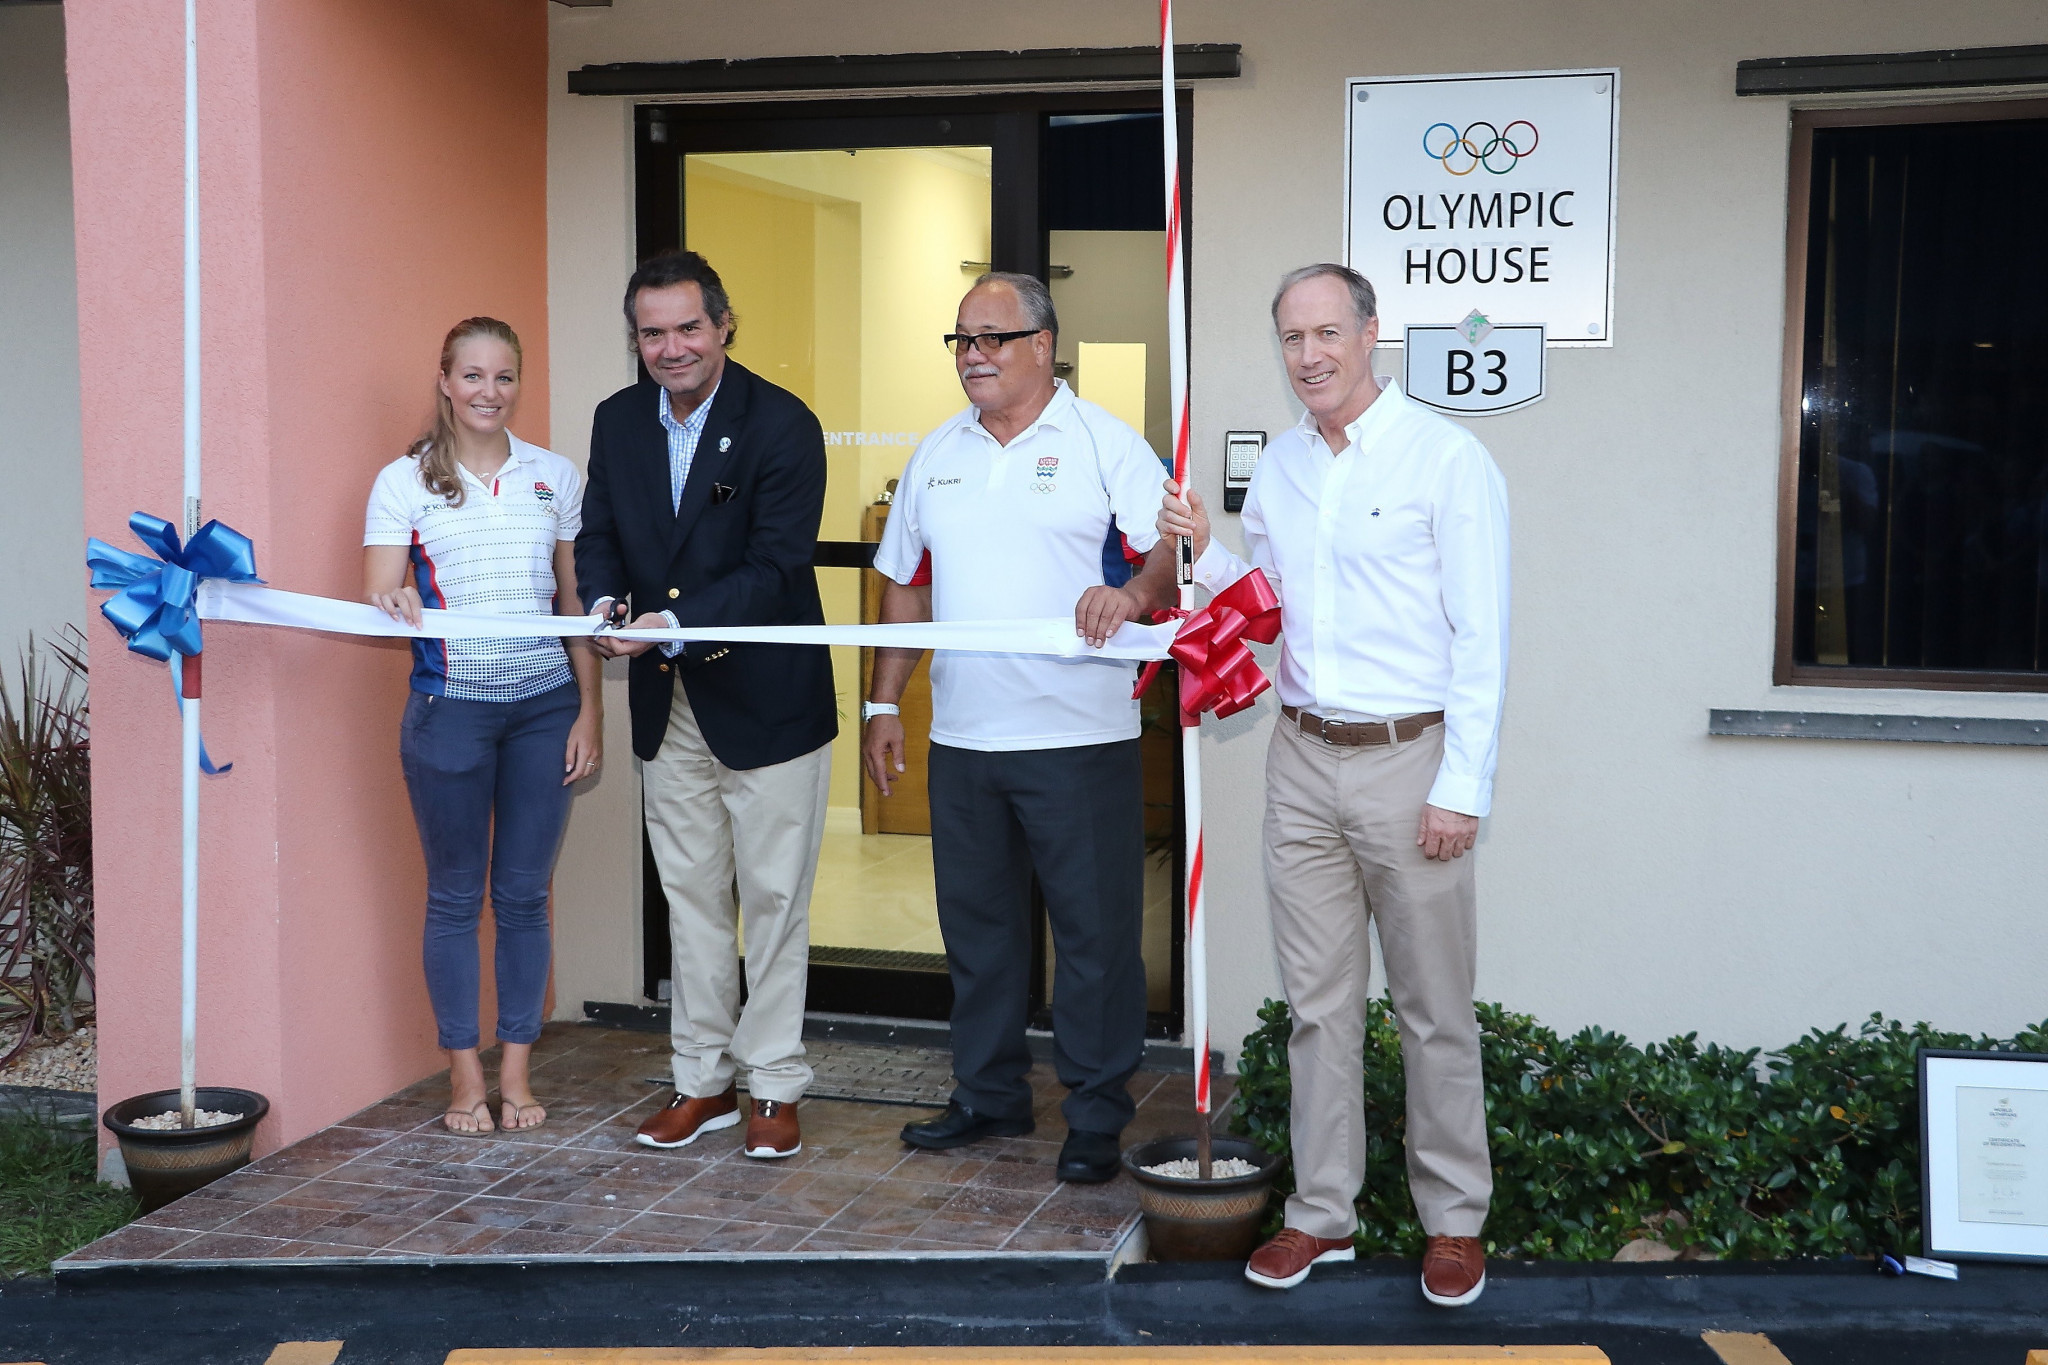 Cayman Islands fulfill dream of first Olympic House